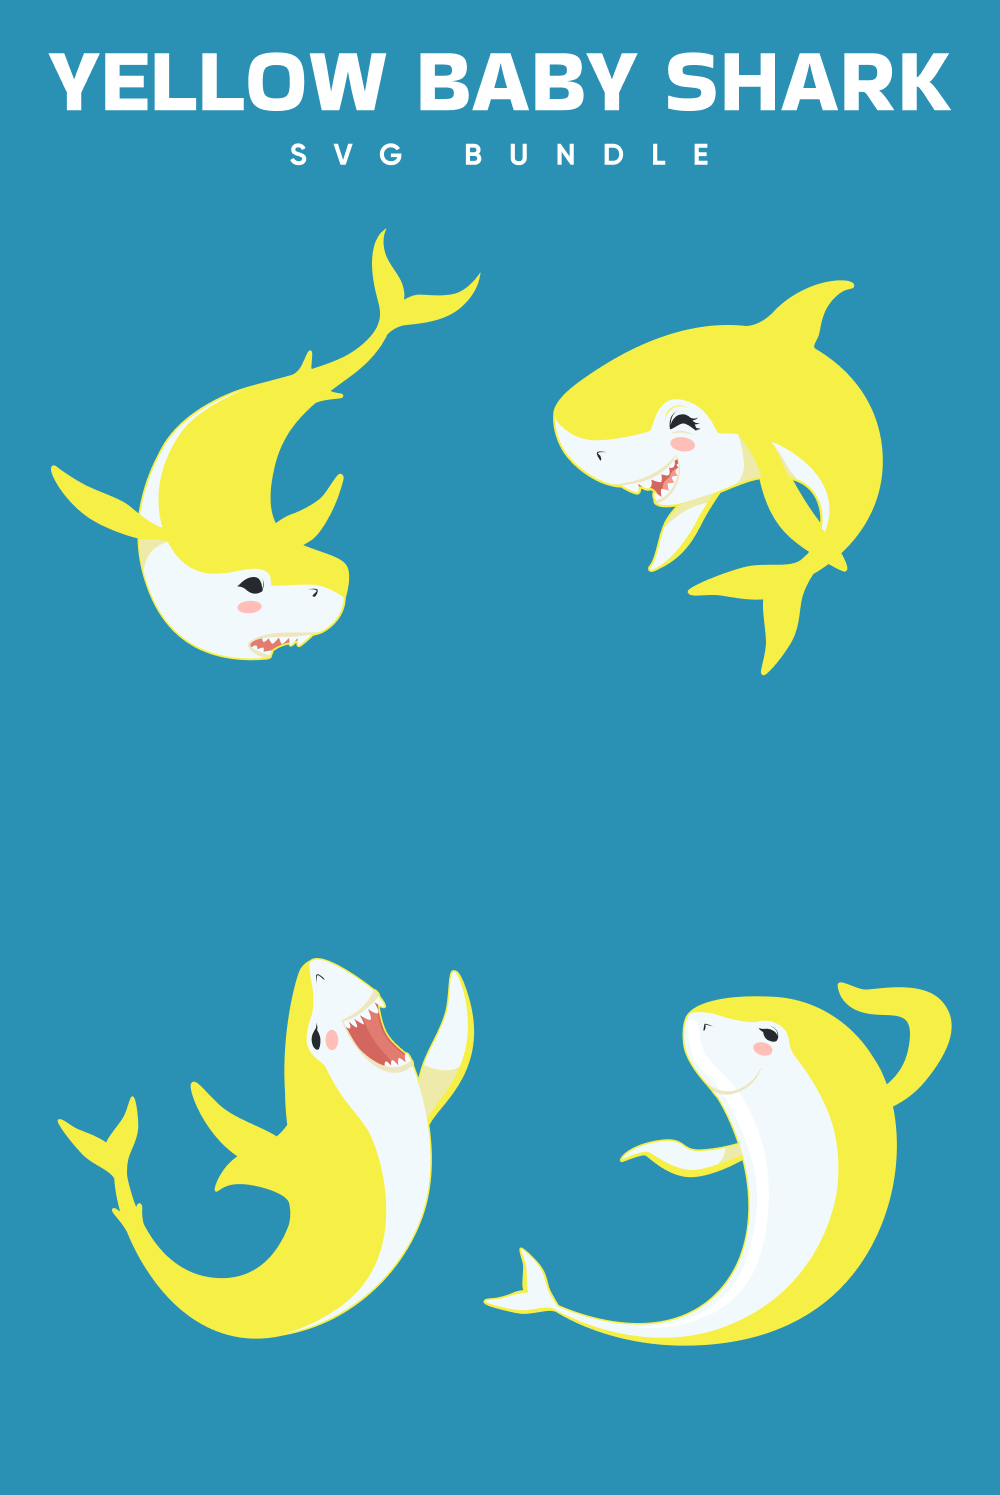 A collage of images of a cheerful yellow shark in different dance poses.